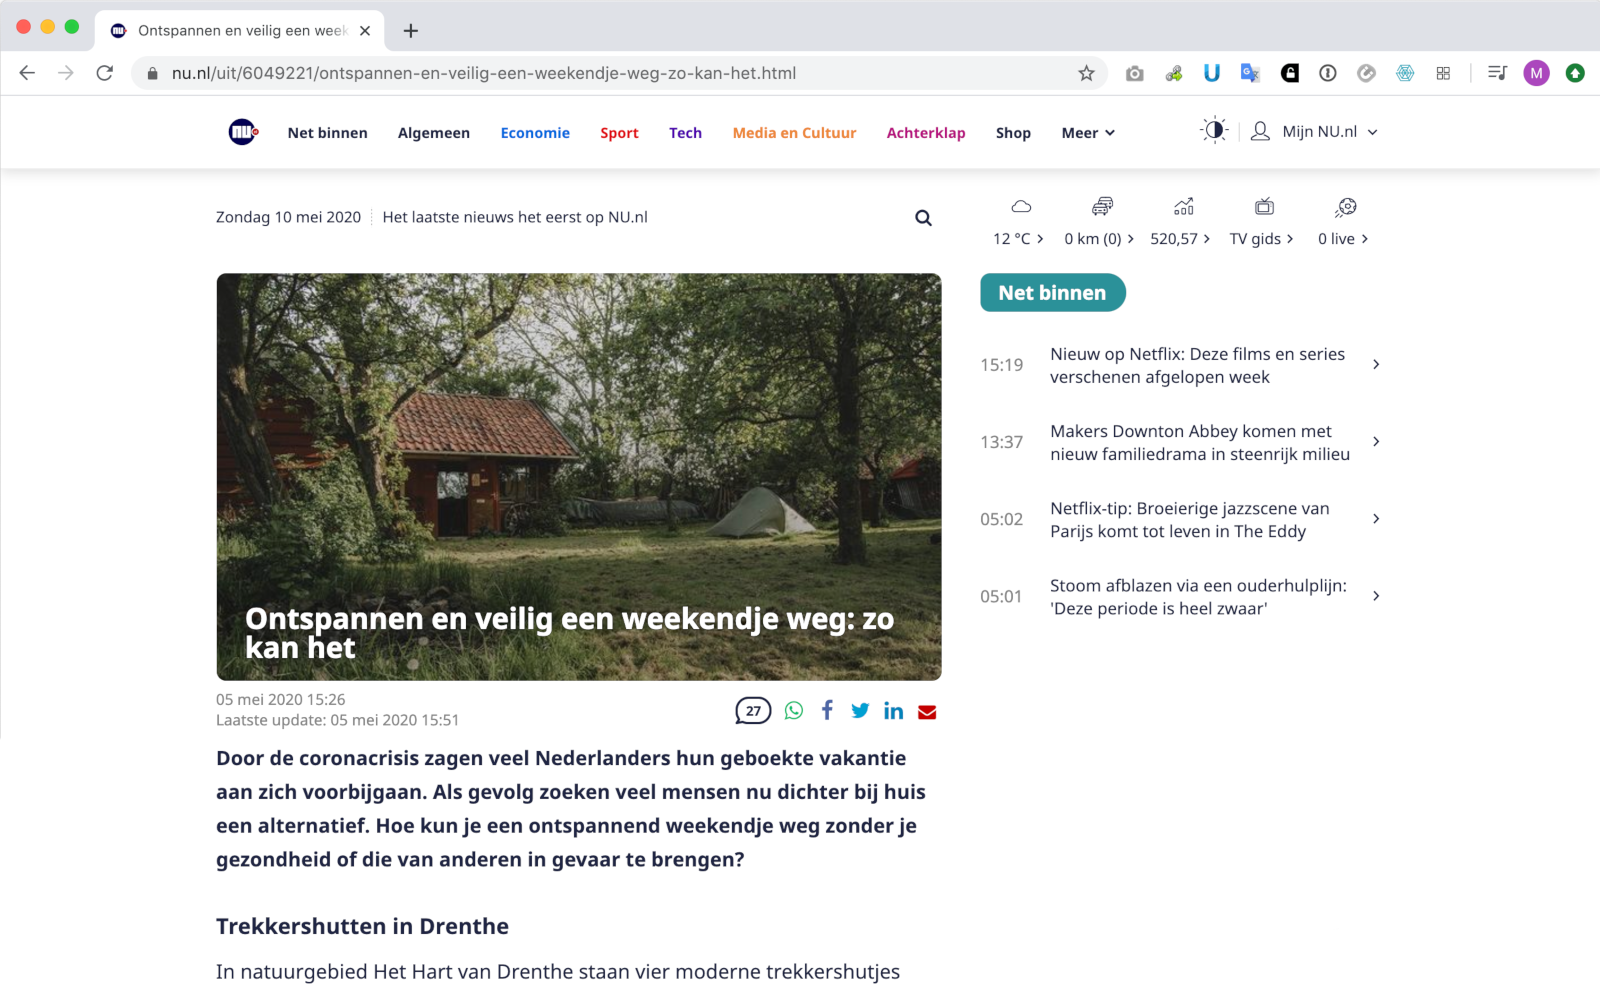 May 5, 2020 — Nu.nl on safe getaways in times of corona